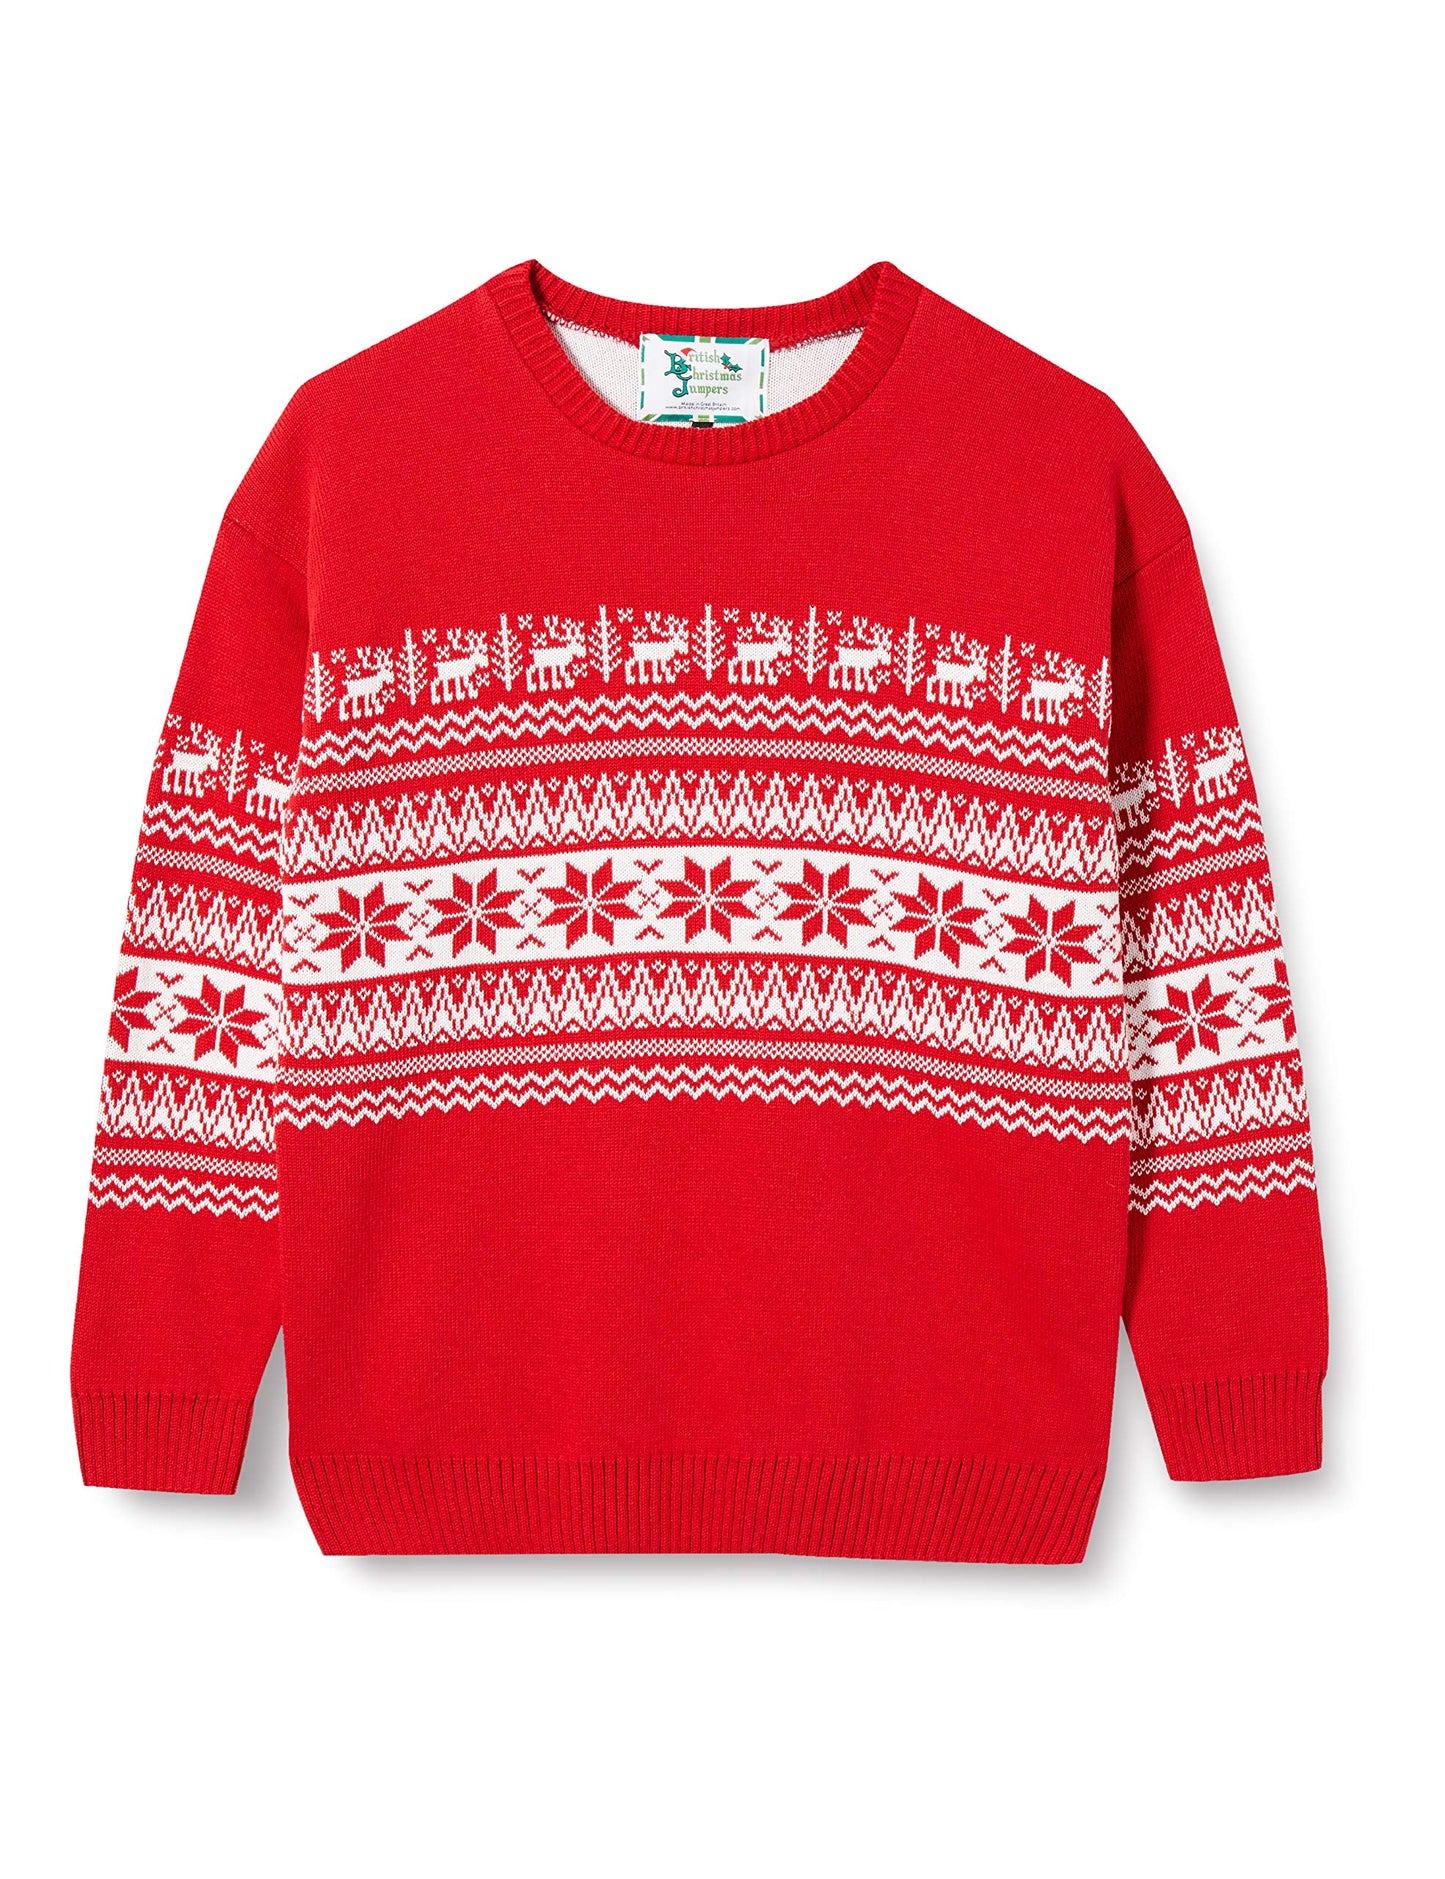 The Nordic Fairisle Red Kids Eco Christmas Jumper (Red, 7_years)